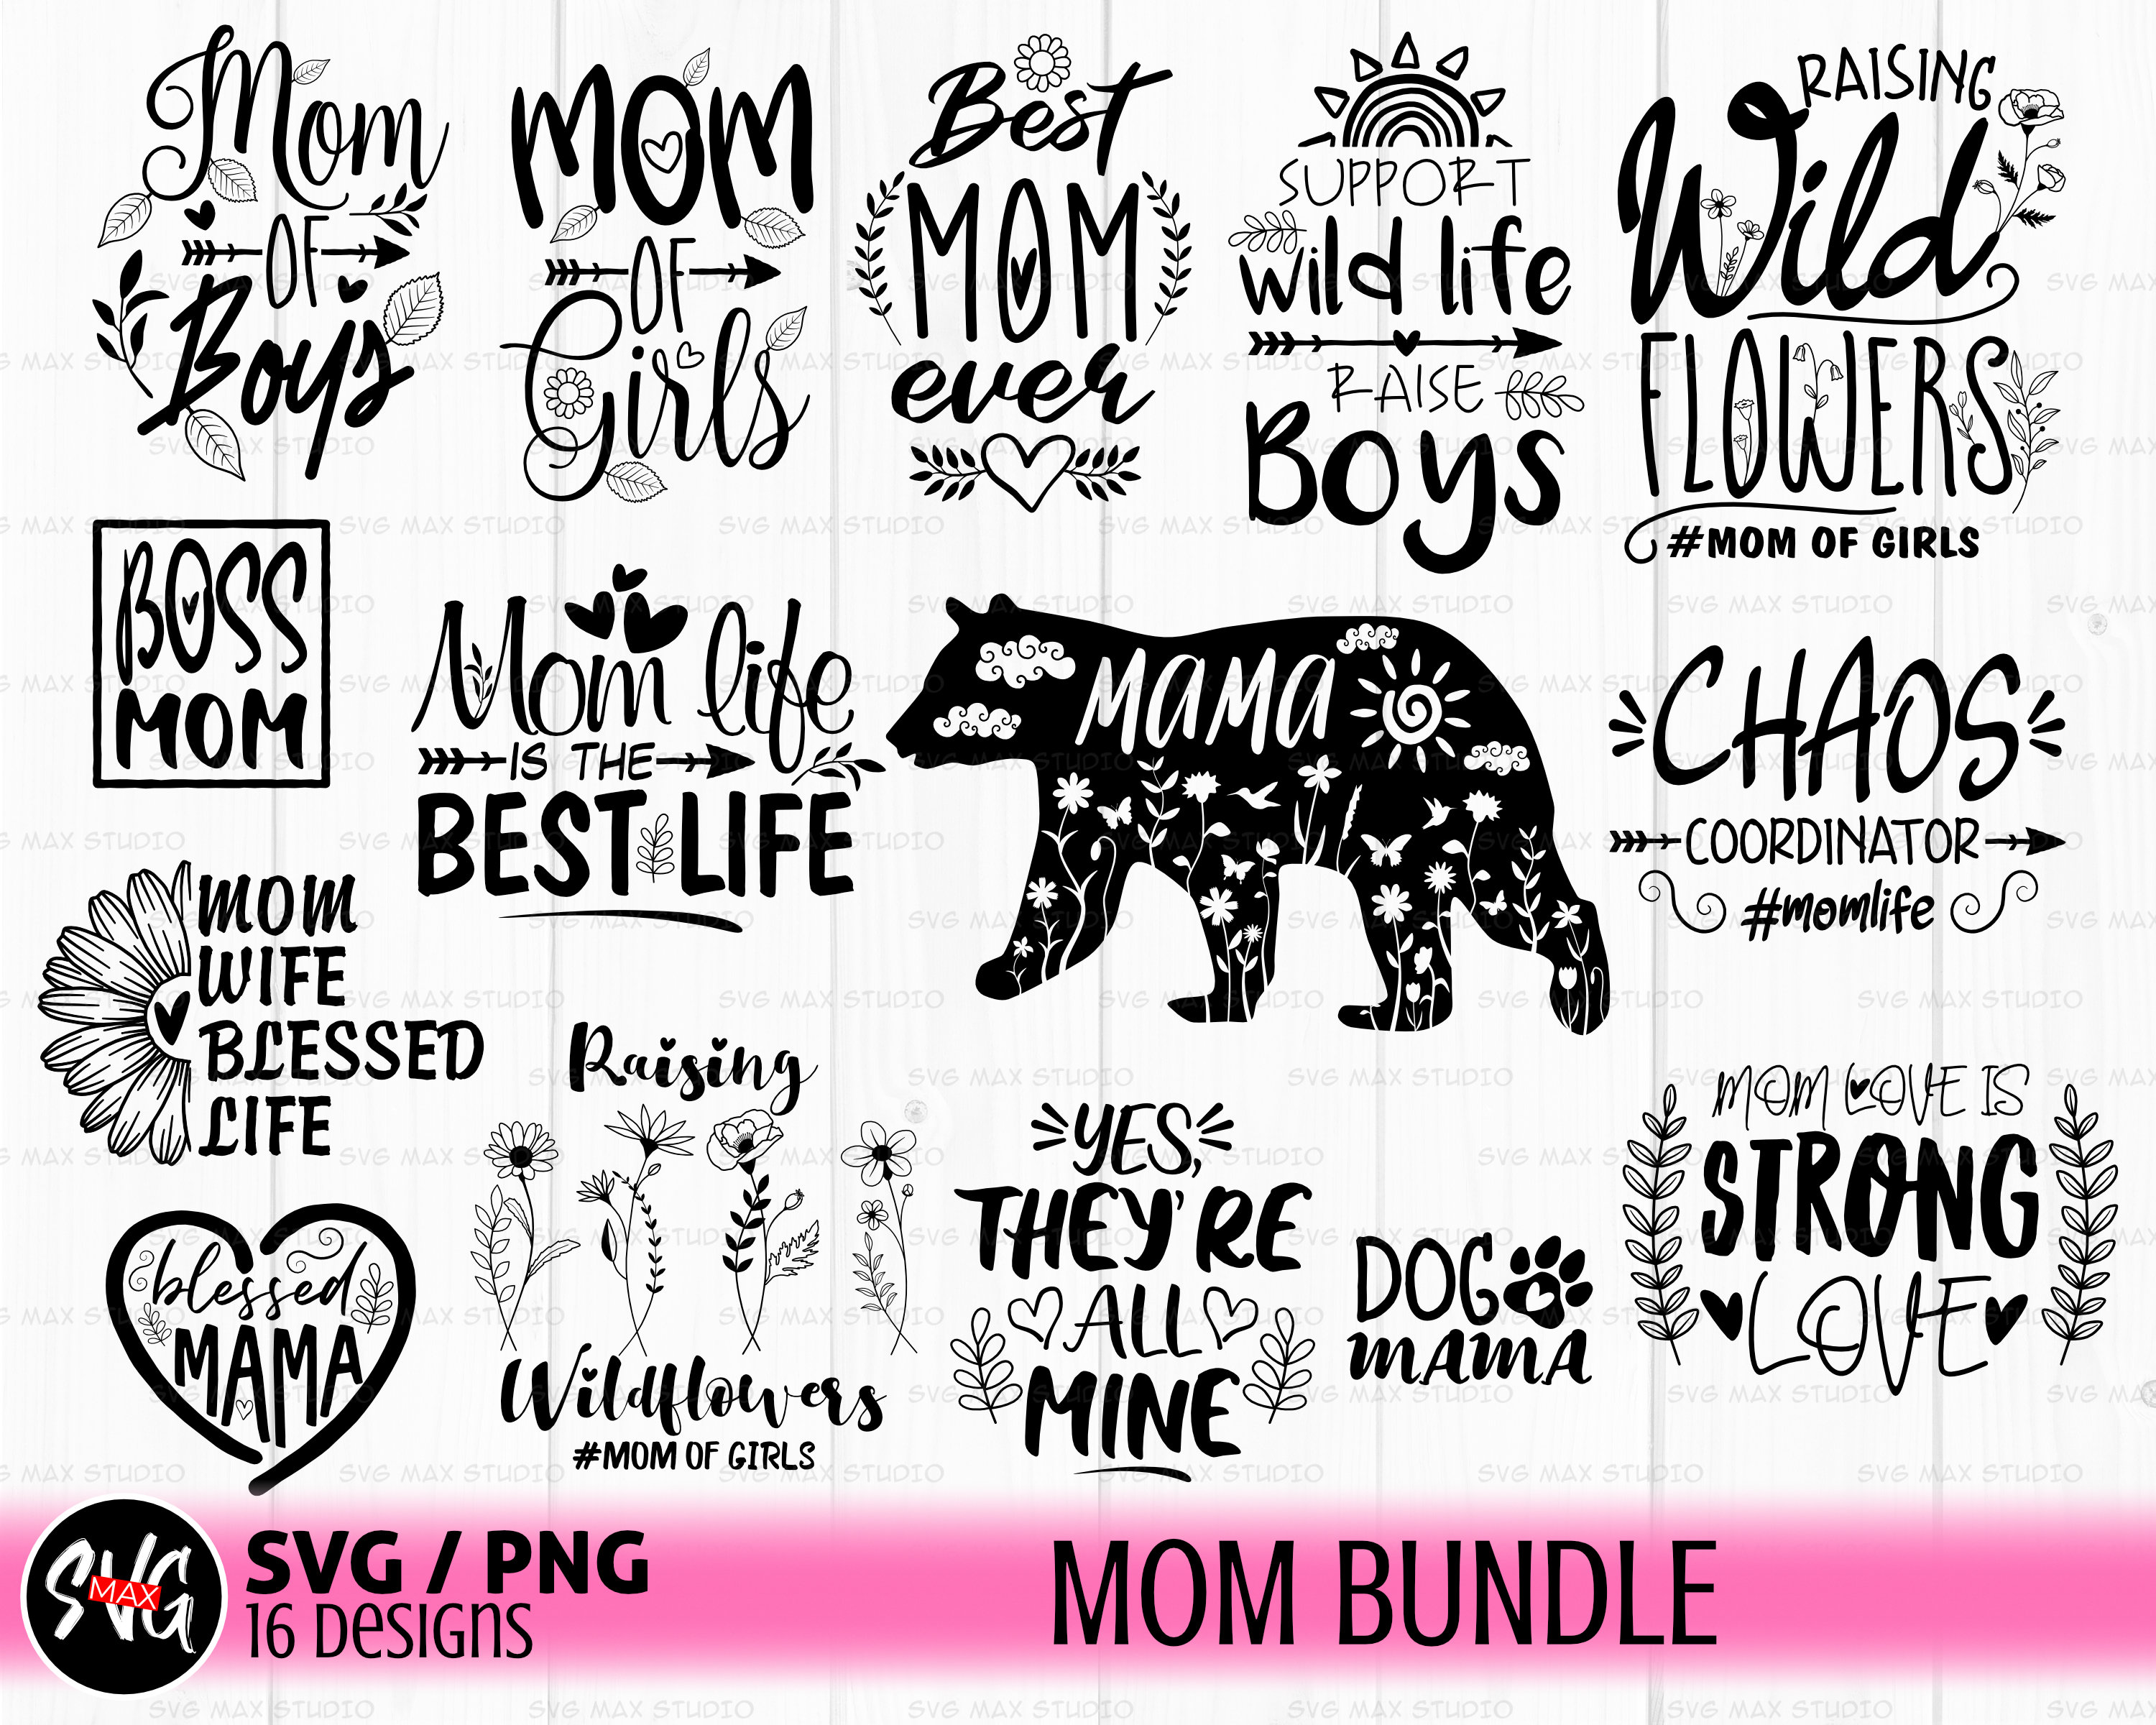 mothers day svg Blessed Mom SVG mama svg blessed mama svg Mom svg bundle mom life svg mom of boys girls svg mom quotes svg png